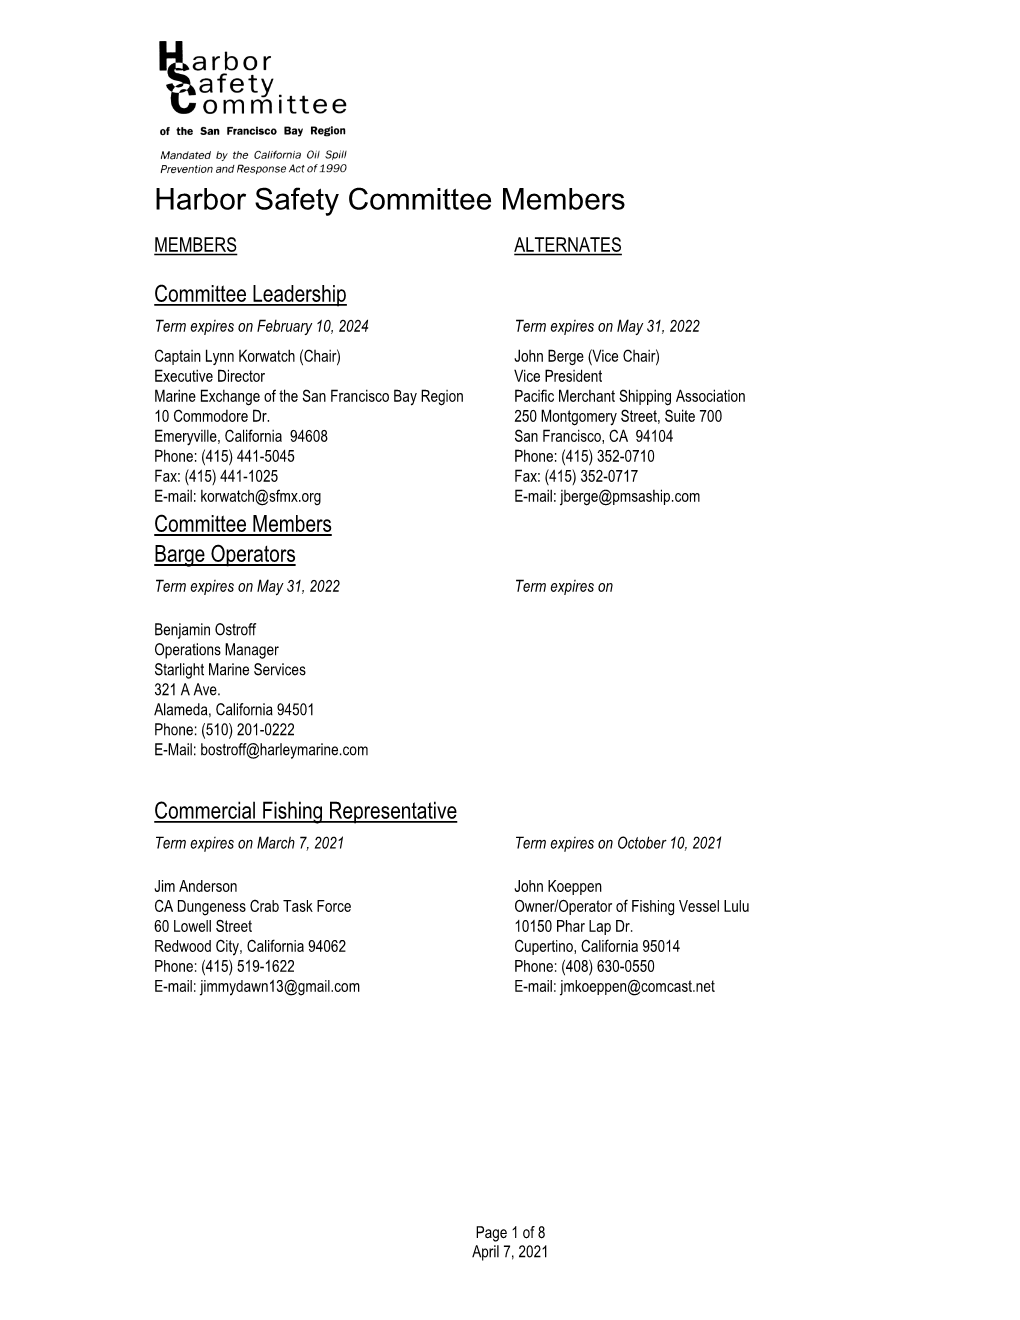 Harbor Safety Committee with Alternates